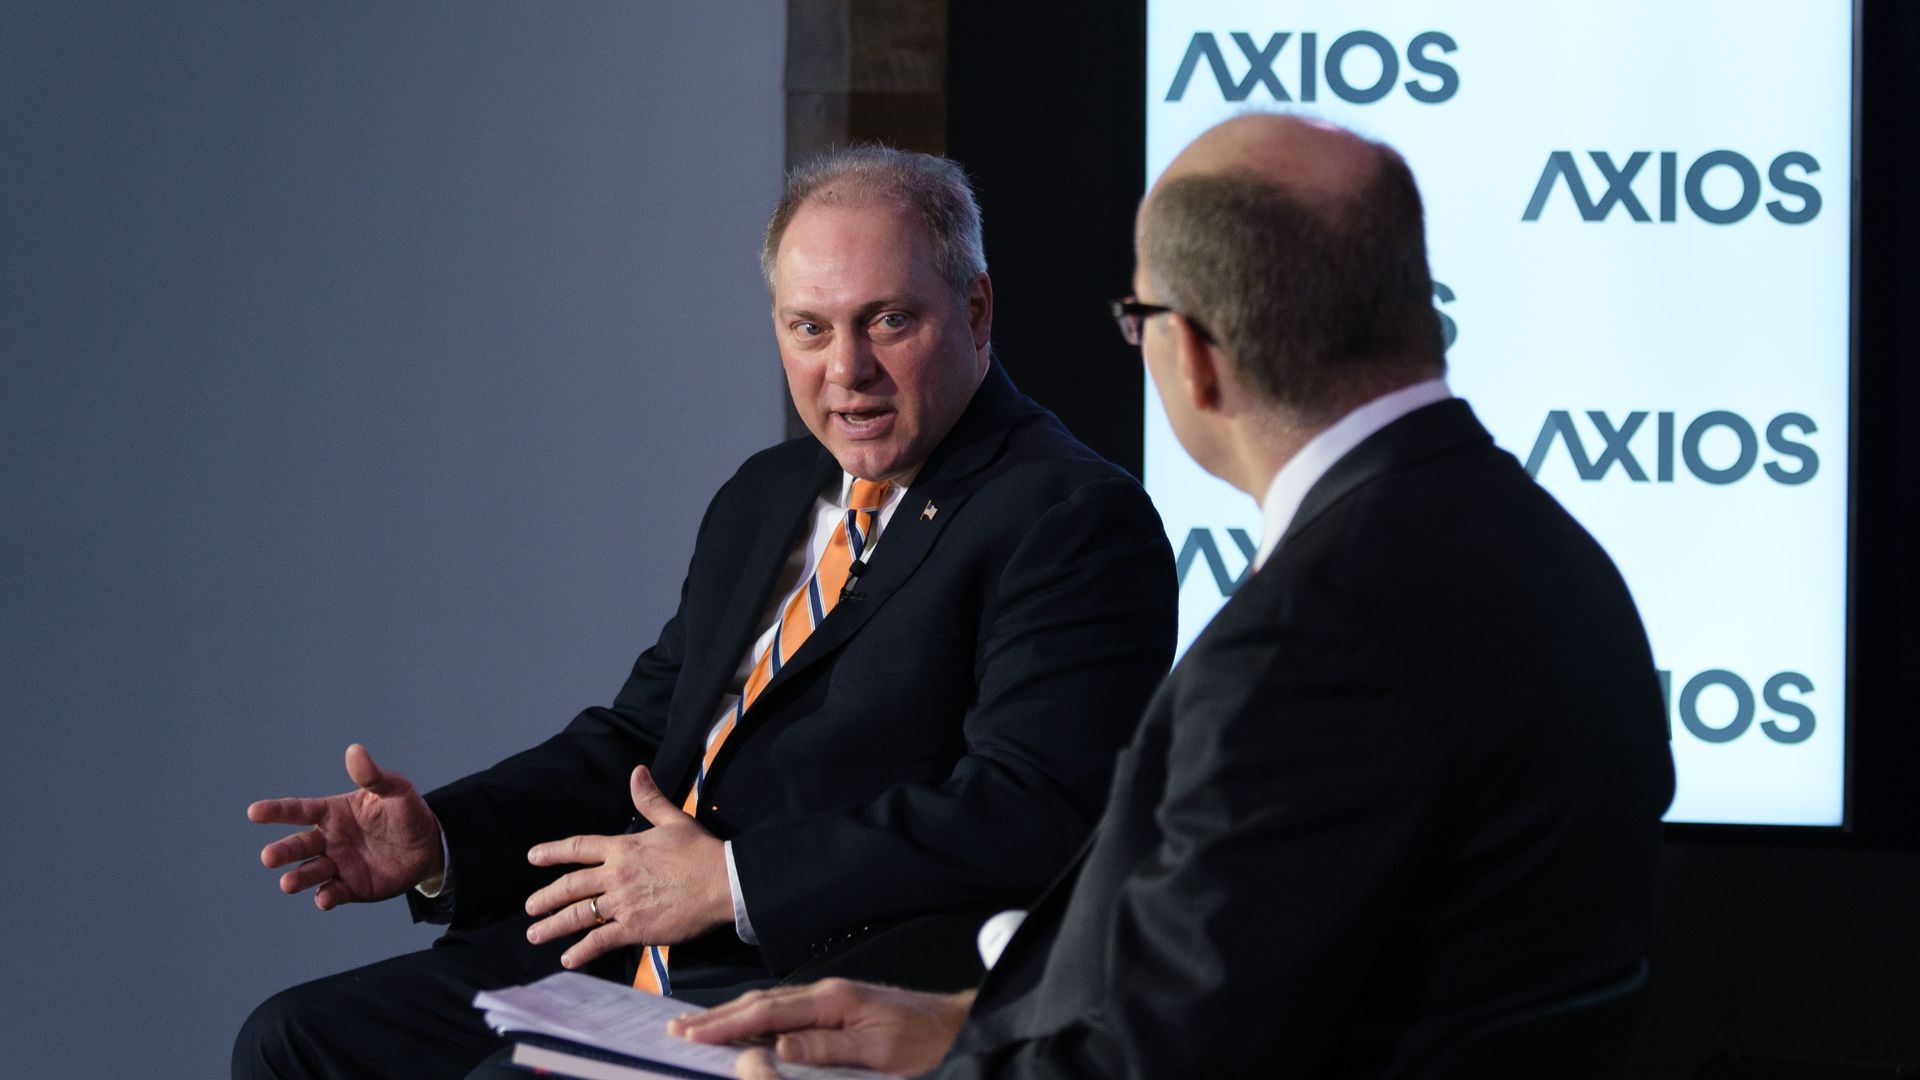 Steve Scalise at an Axios event talking with Mike Allen.